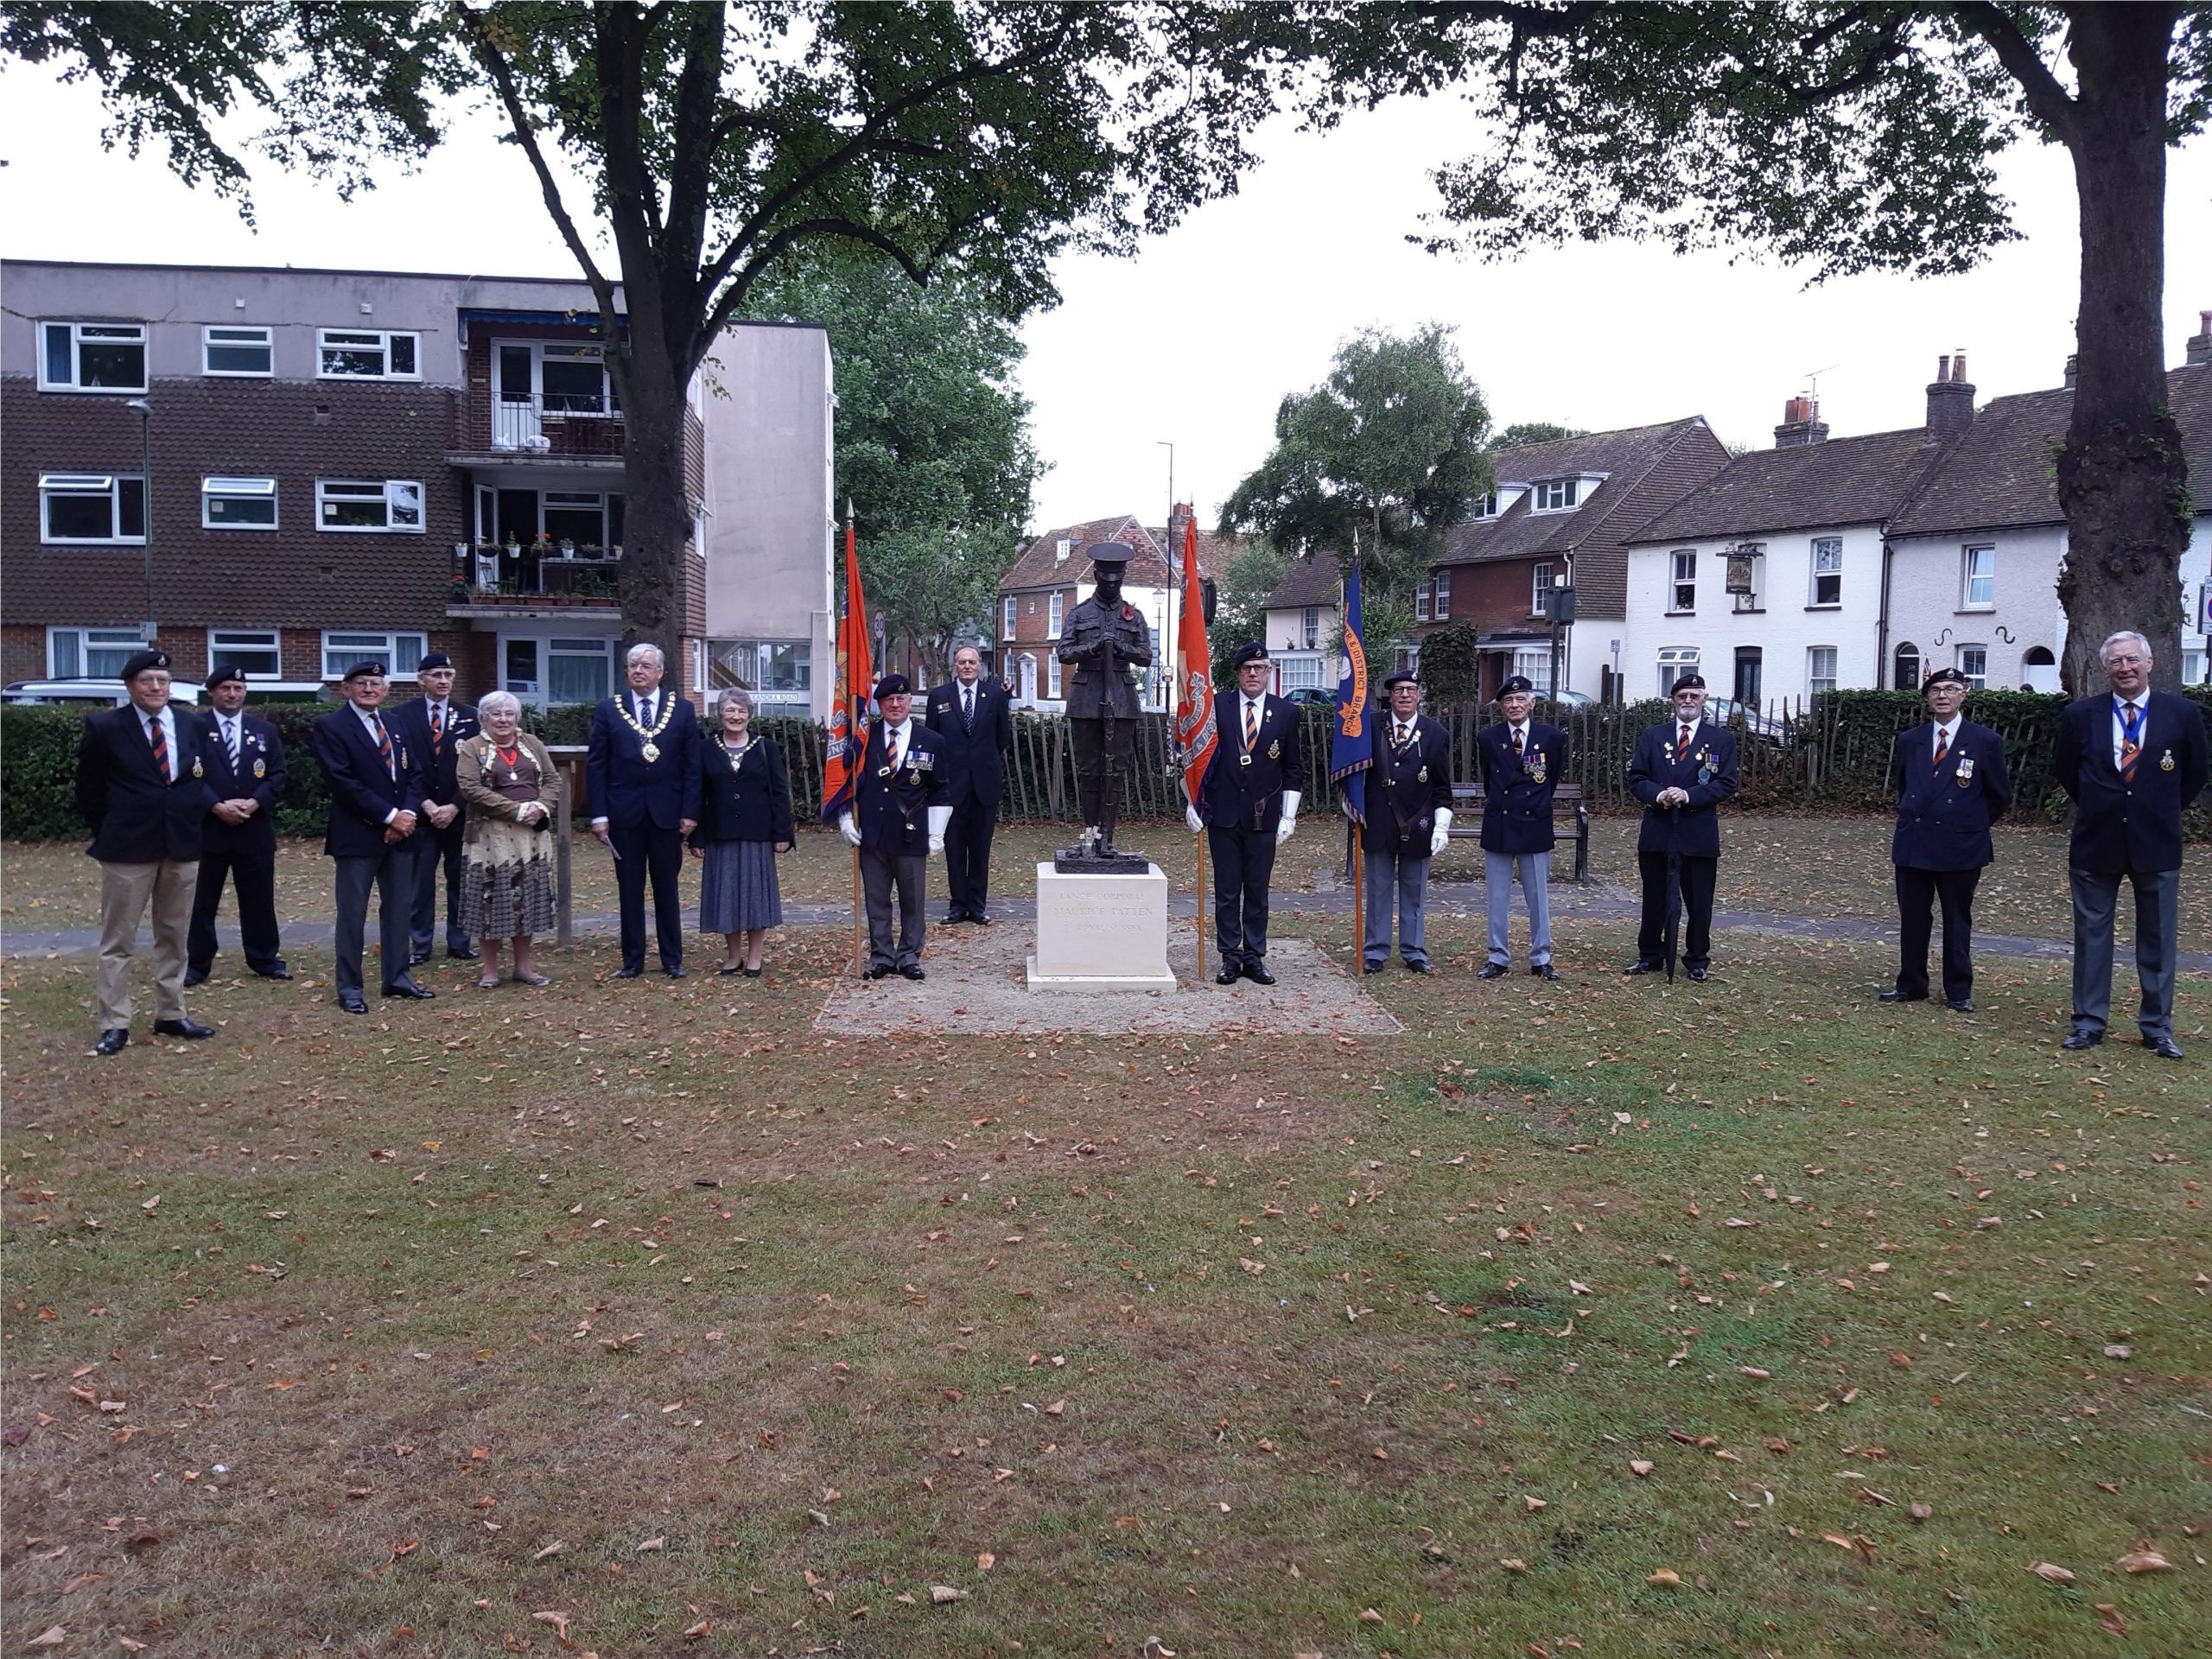 Image showing Royal Sussex Regiment veterans accompanied by Chichester City Councillors Scicluna, Plowman and Bell, unveiling the statue of Maurice Patten, November 2019